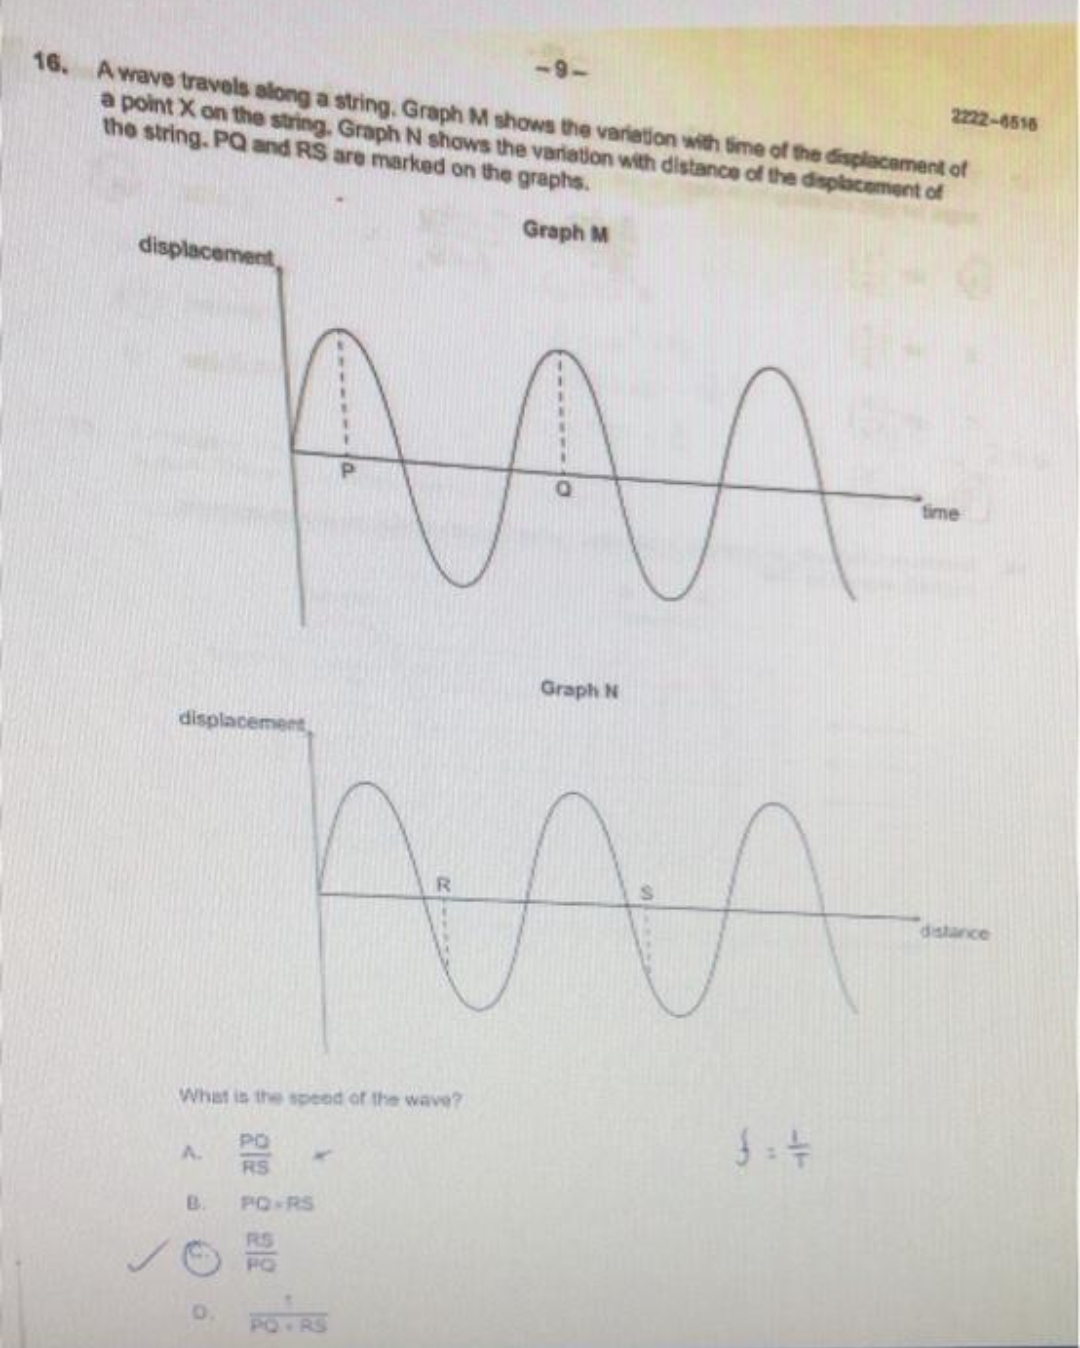 16. A wave travels along a string, Graph M shows the variation with time of the displacement of
a point X on the string, Graph N shows the variation with distance of the displacement of
the string. PQ and RS are marked on the graphs.
Graph M
displacement
displacement,
AA
AAA
R
B.
What is the speed of the wave?
C
P
PO
RS
PQ-RS
RS
Graph N
2222-6516
time
distance